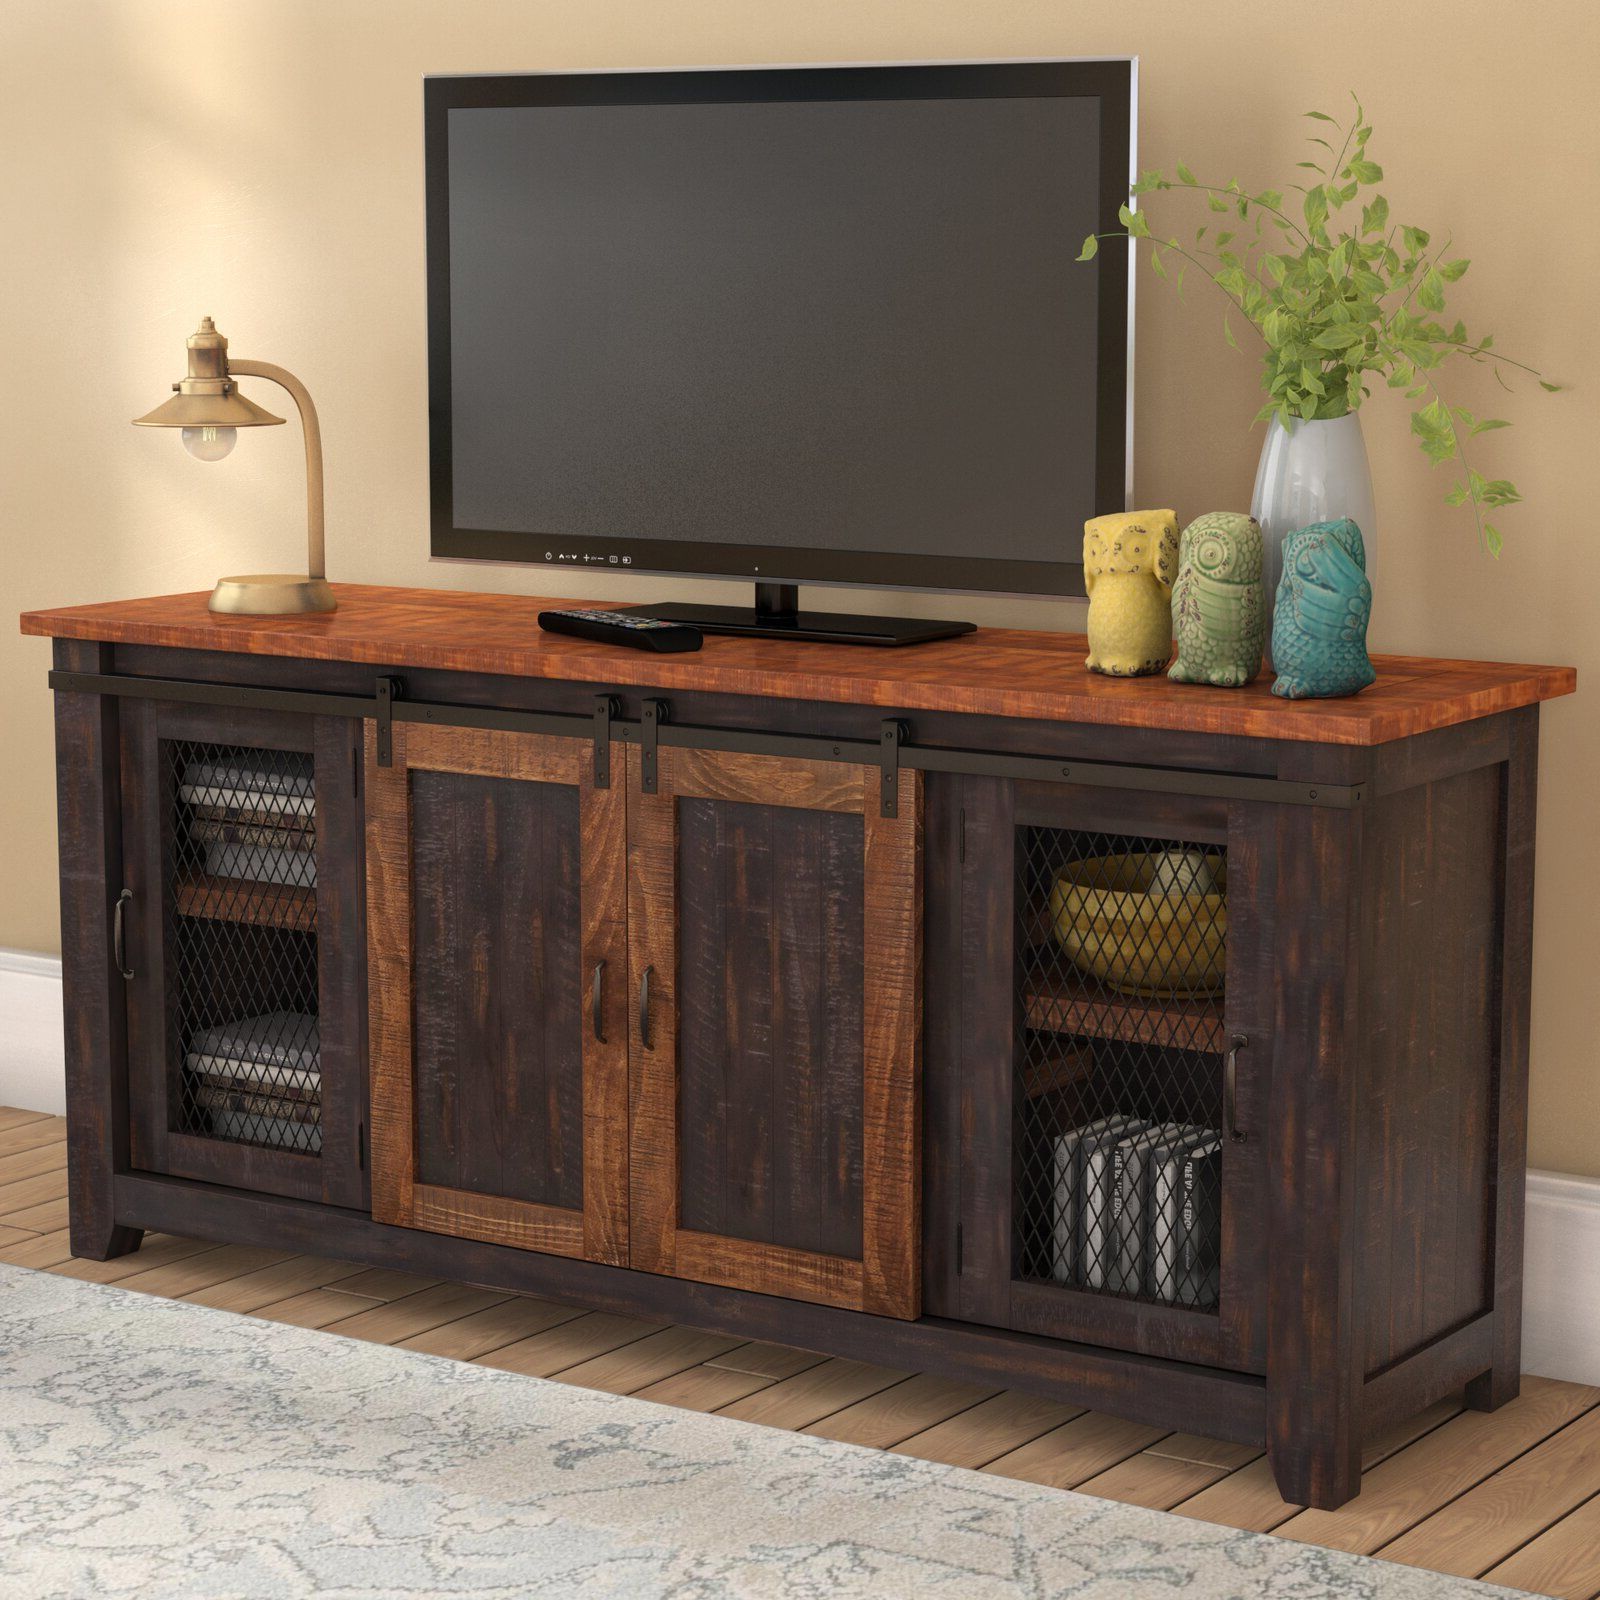 Belen Tv Stand For Tvs Up To 70" & Reviews | Joss & Main Throughout Giltner Solid Wood Tv Stands For Tvs Up To 65" (View 5 of 20)